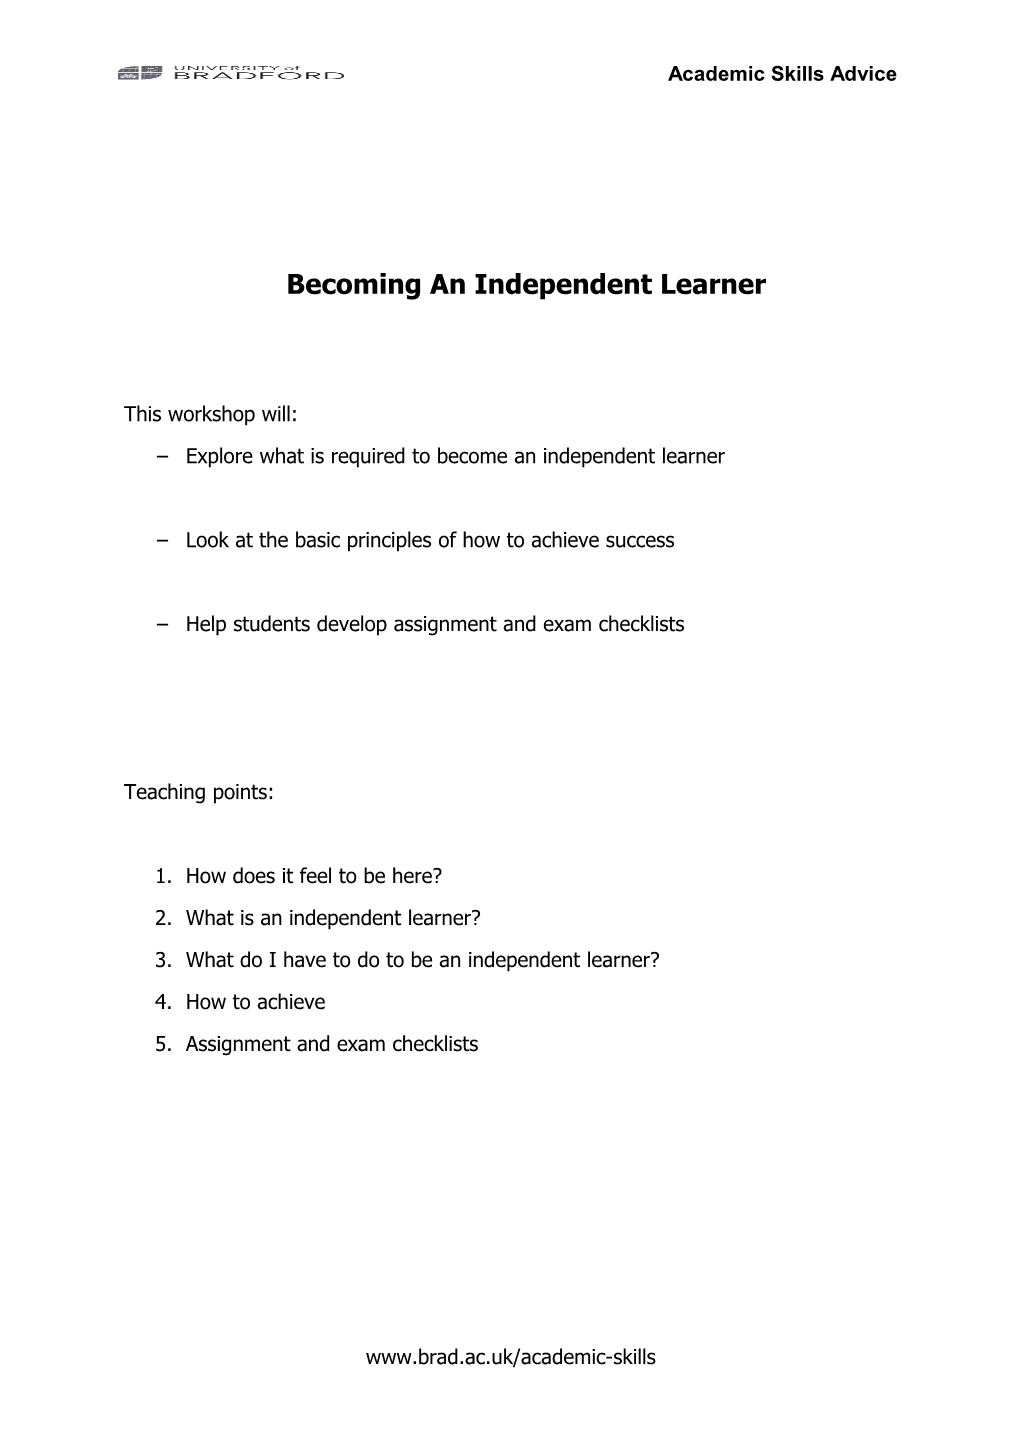 Becoming an Independent Learner